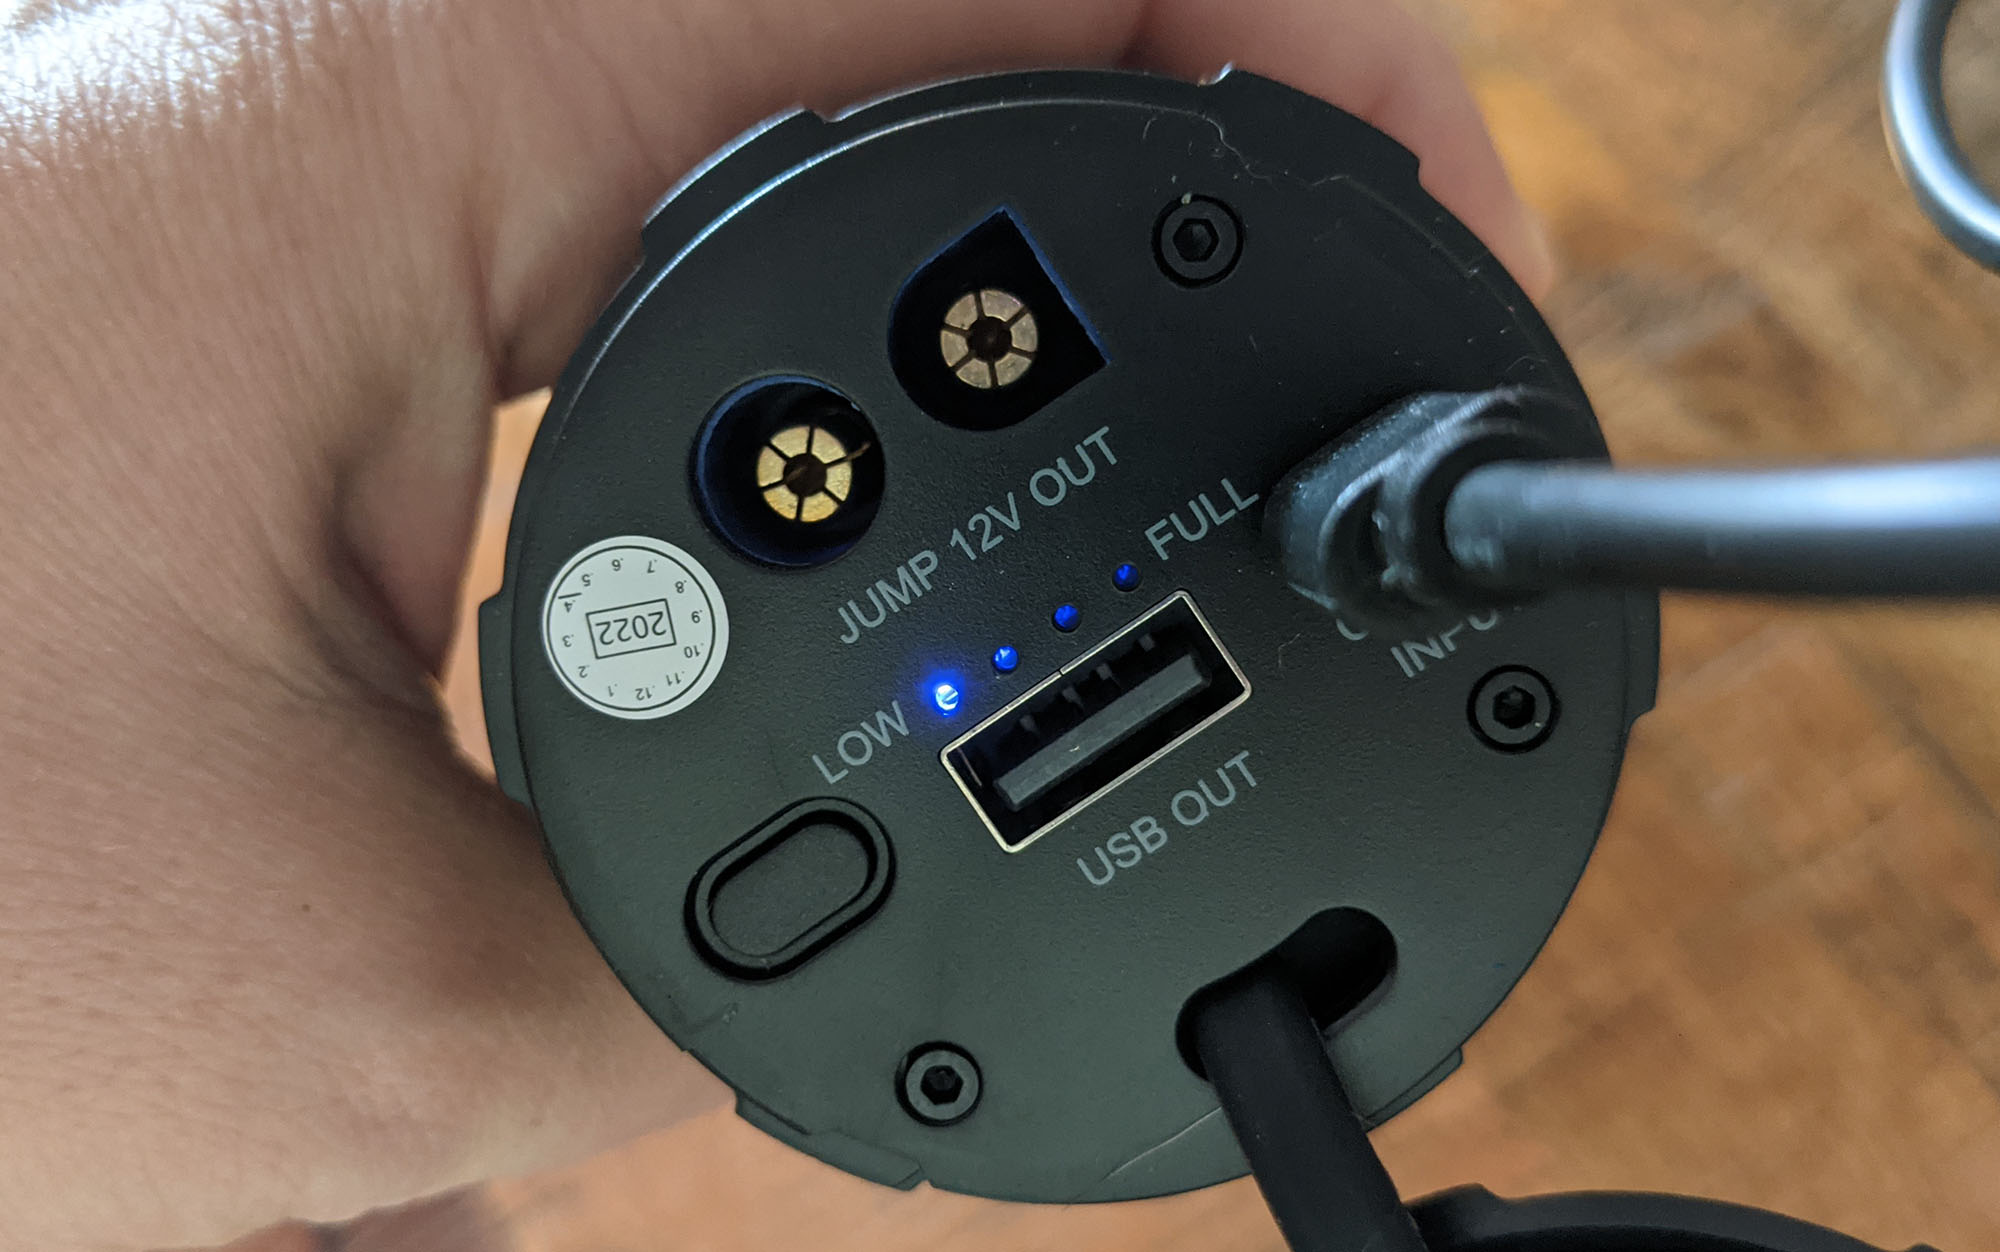 In addition to the input port, the Scosche Powerup 600 Torch also has a USB output port and a port for the jumper cables.